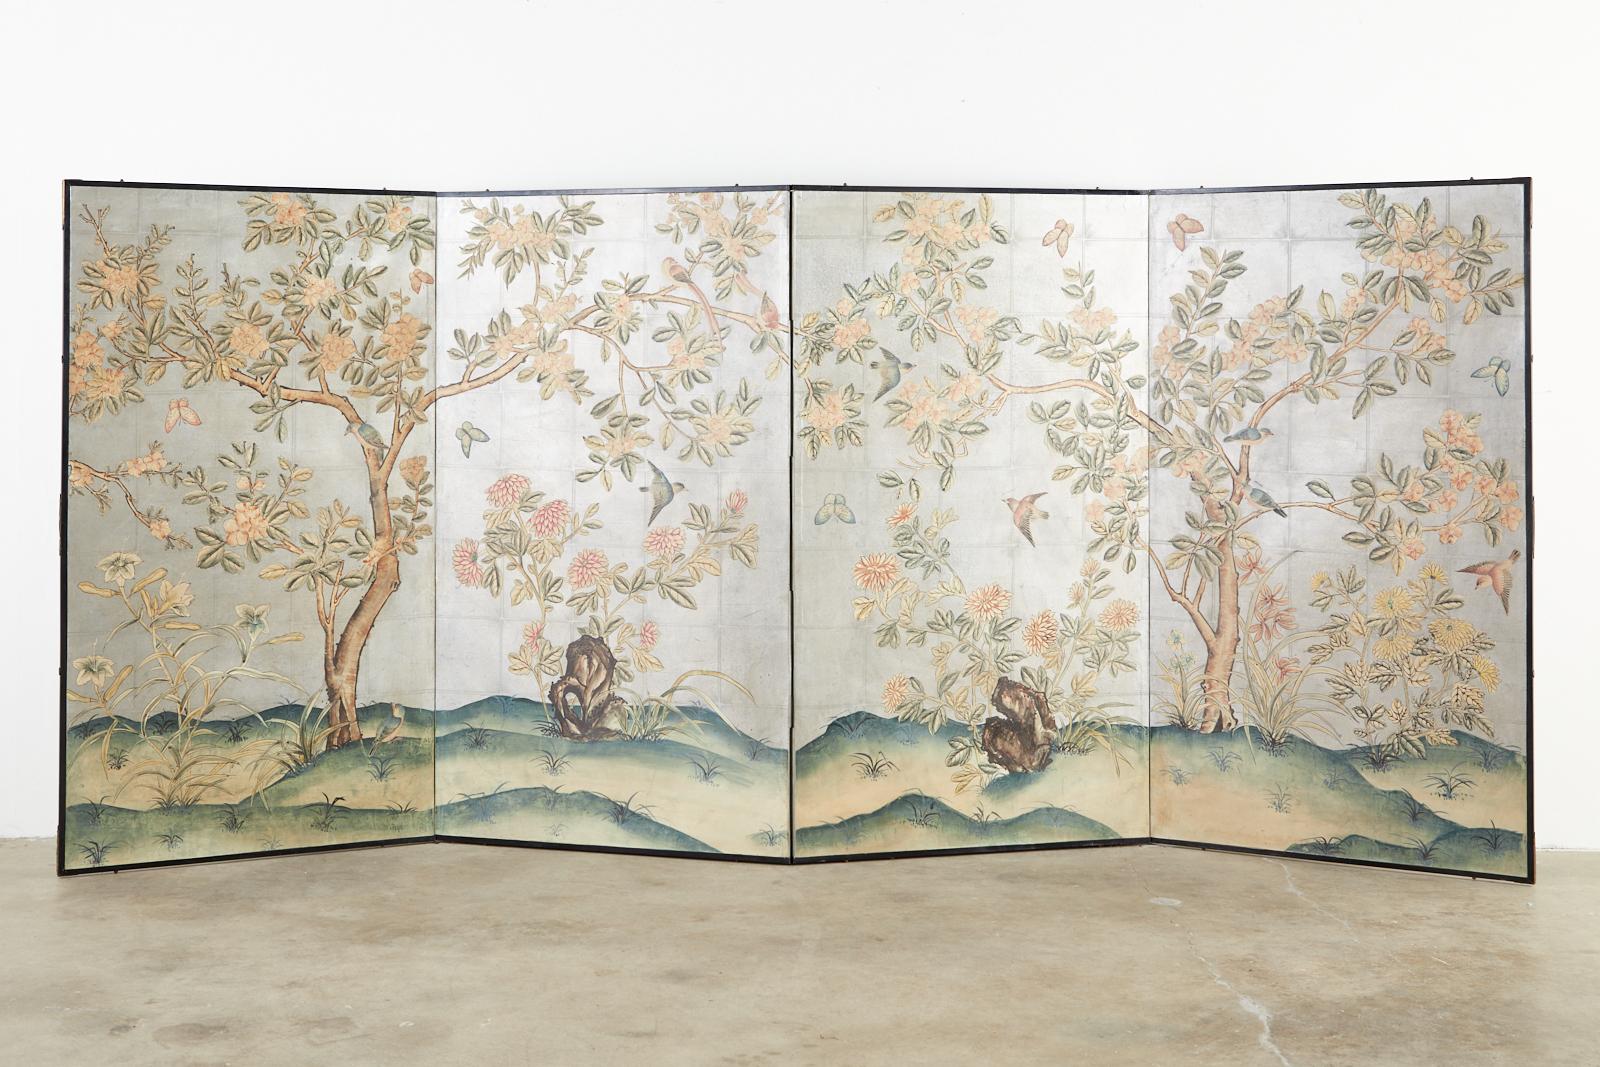 Fantastic Chinese early 20th century hand painted wallpaper panels mounted in a four-panel screen. Made in the manner and style of Gracie in the chinoiserie revival period mid-19th century through the early 20th century of Europe and the United